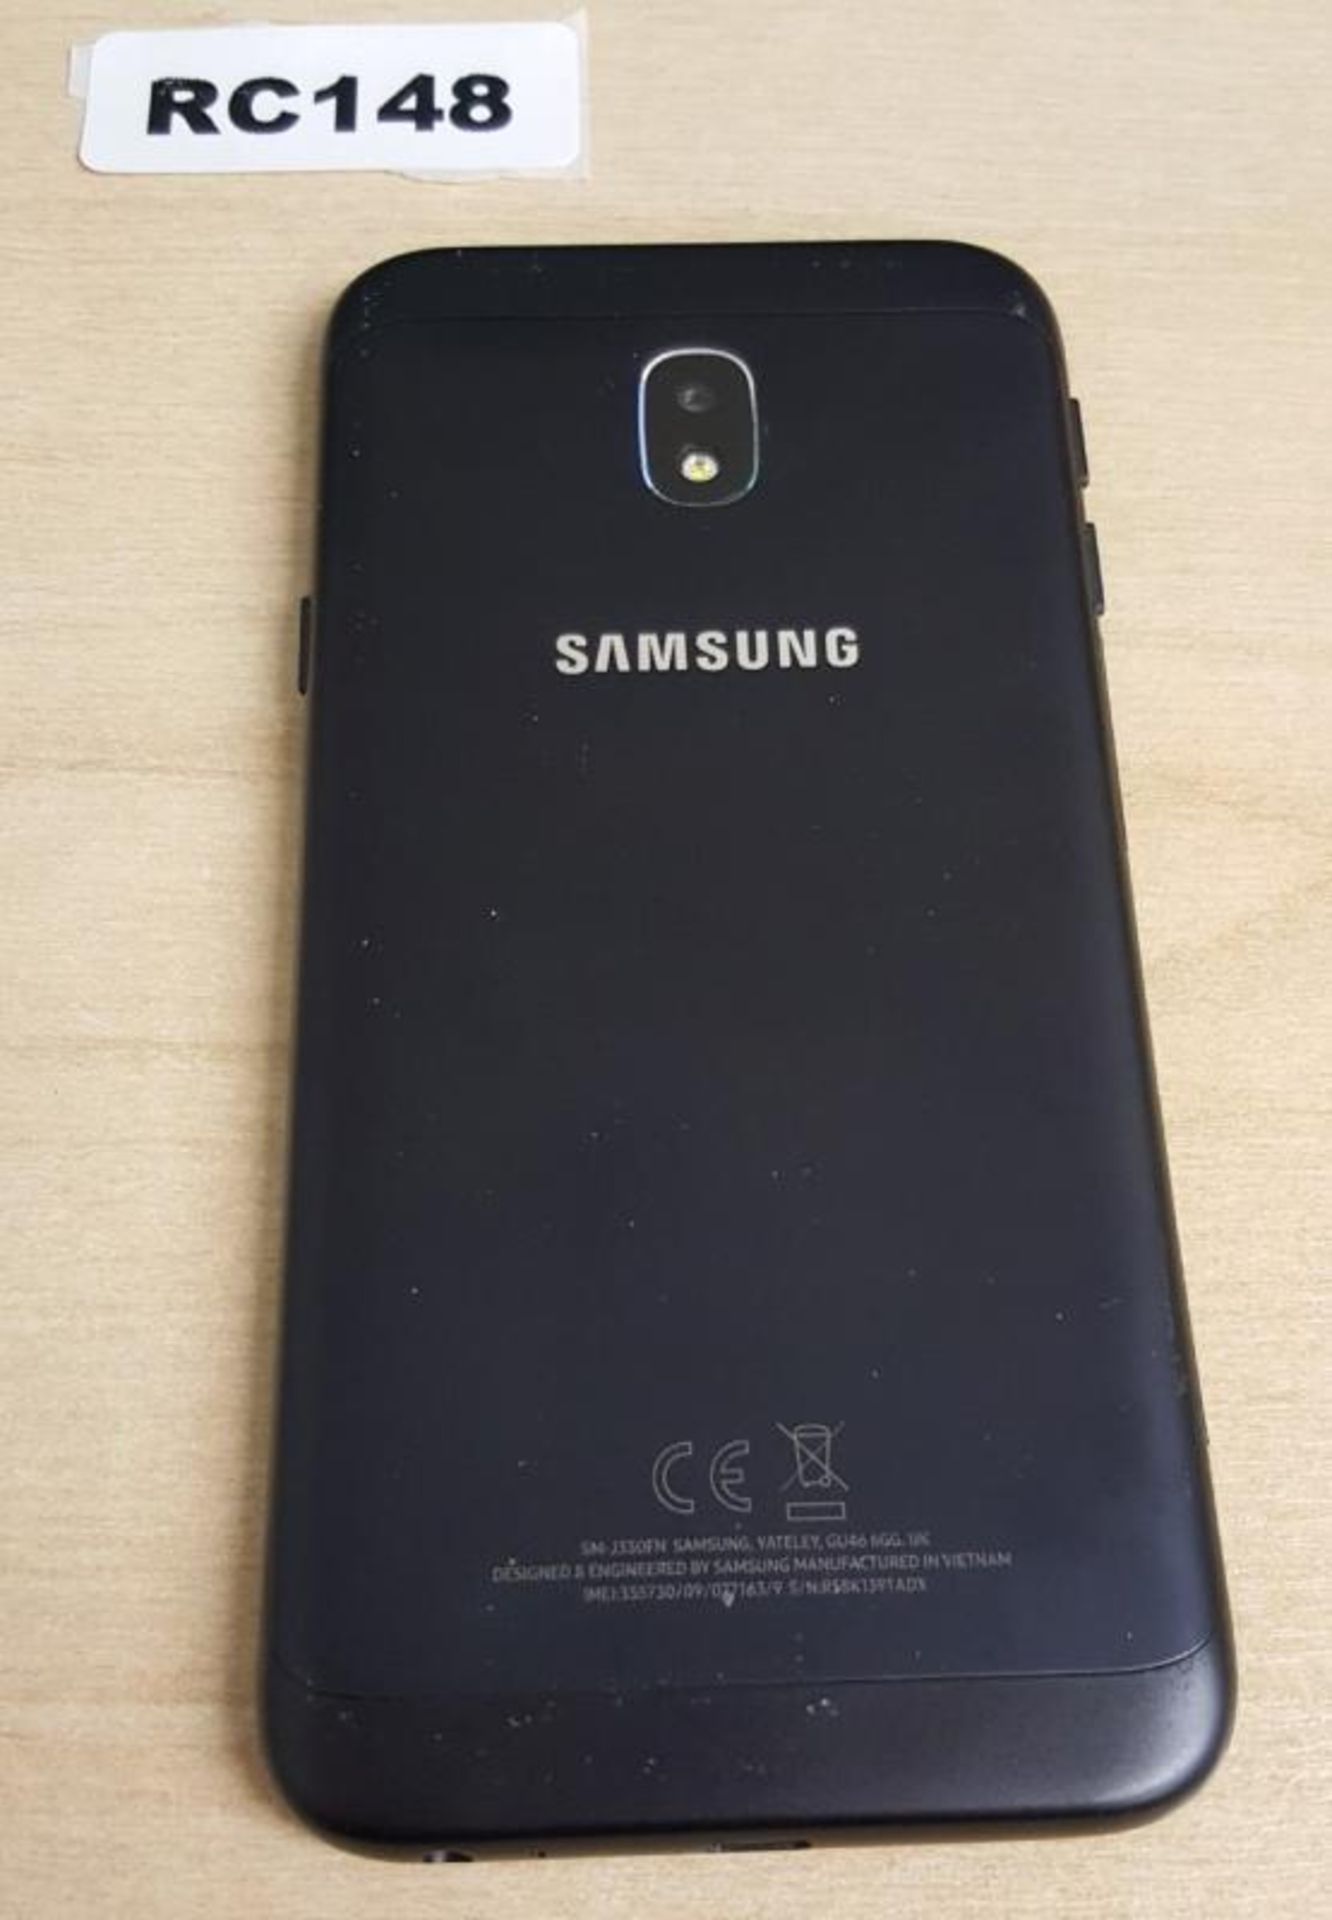 1 x Samsung Galaxy J3 (2017) Black Smartphone(Phone Has Been Turned On And Factory Reset) Does Not C - Image 2 of 2